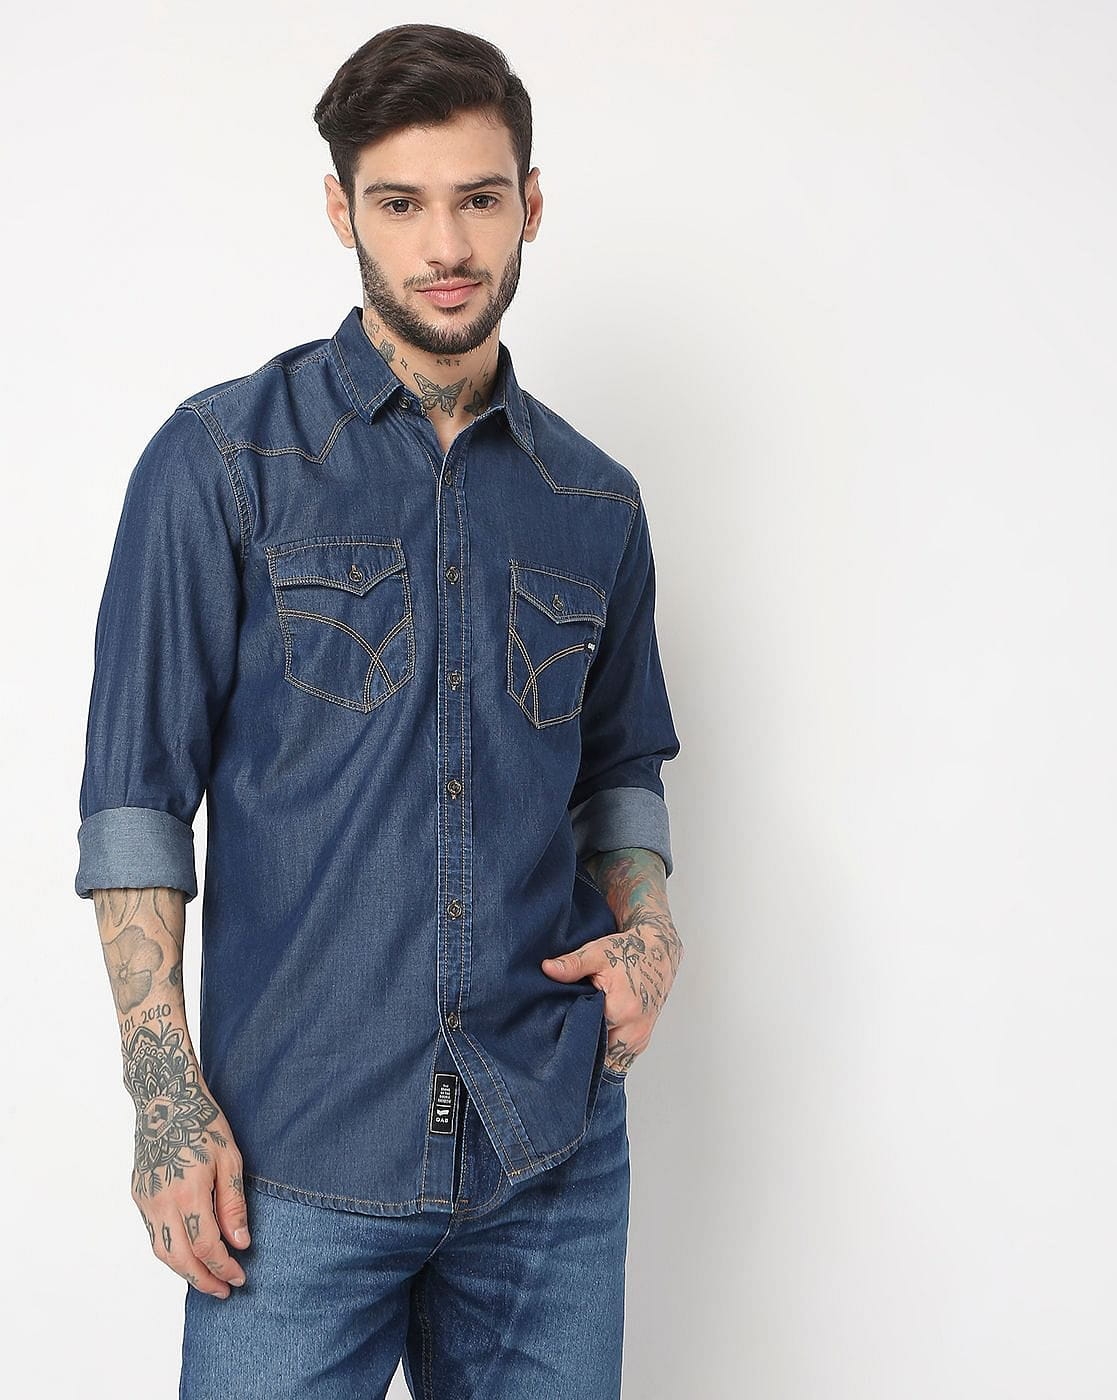 Regular Fit Full Sleeve Solid Cotton Shirts